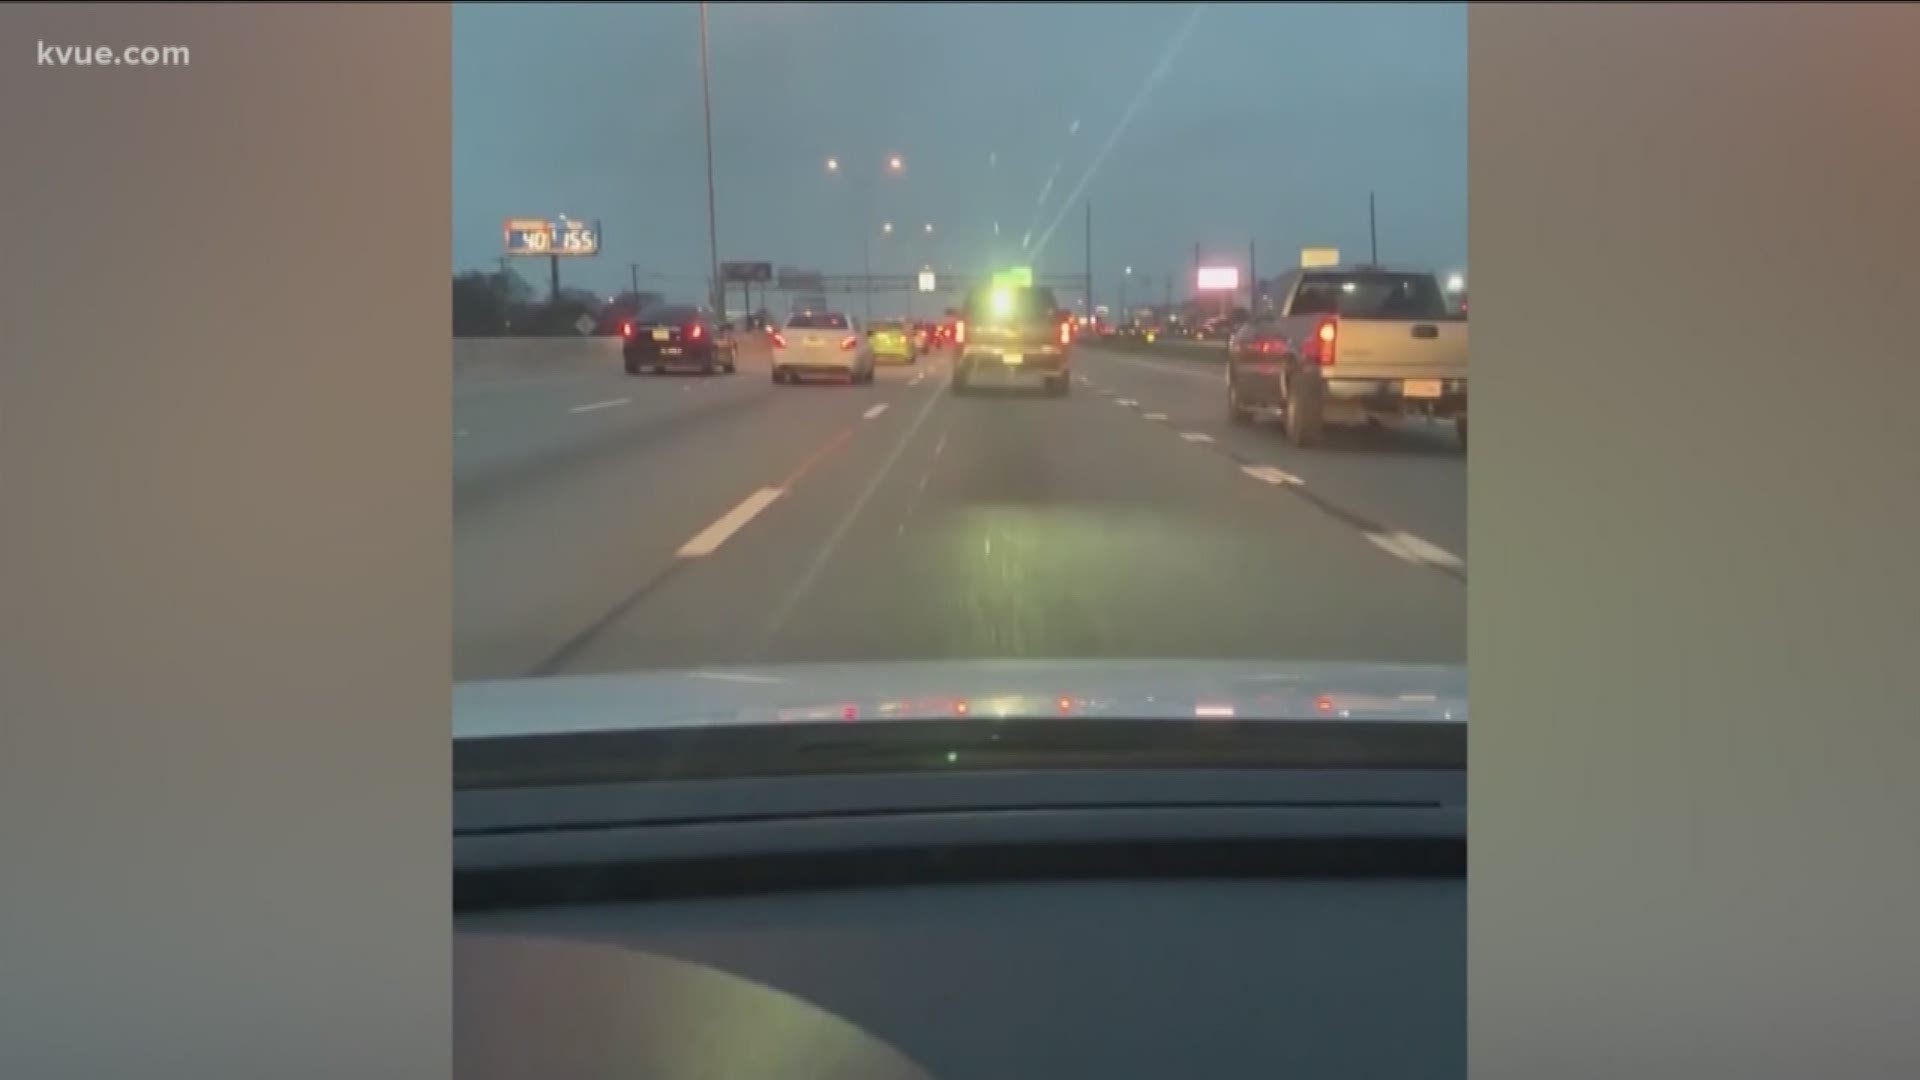 The man who took the video says it's a case of road rage.